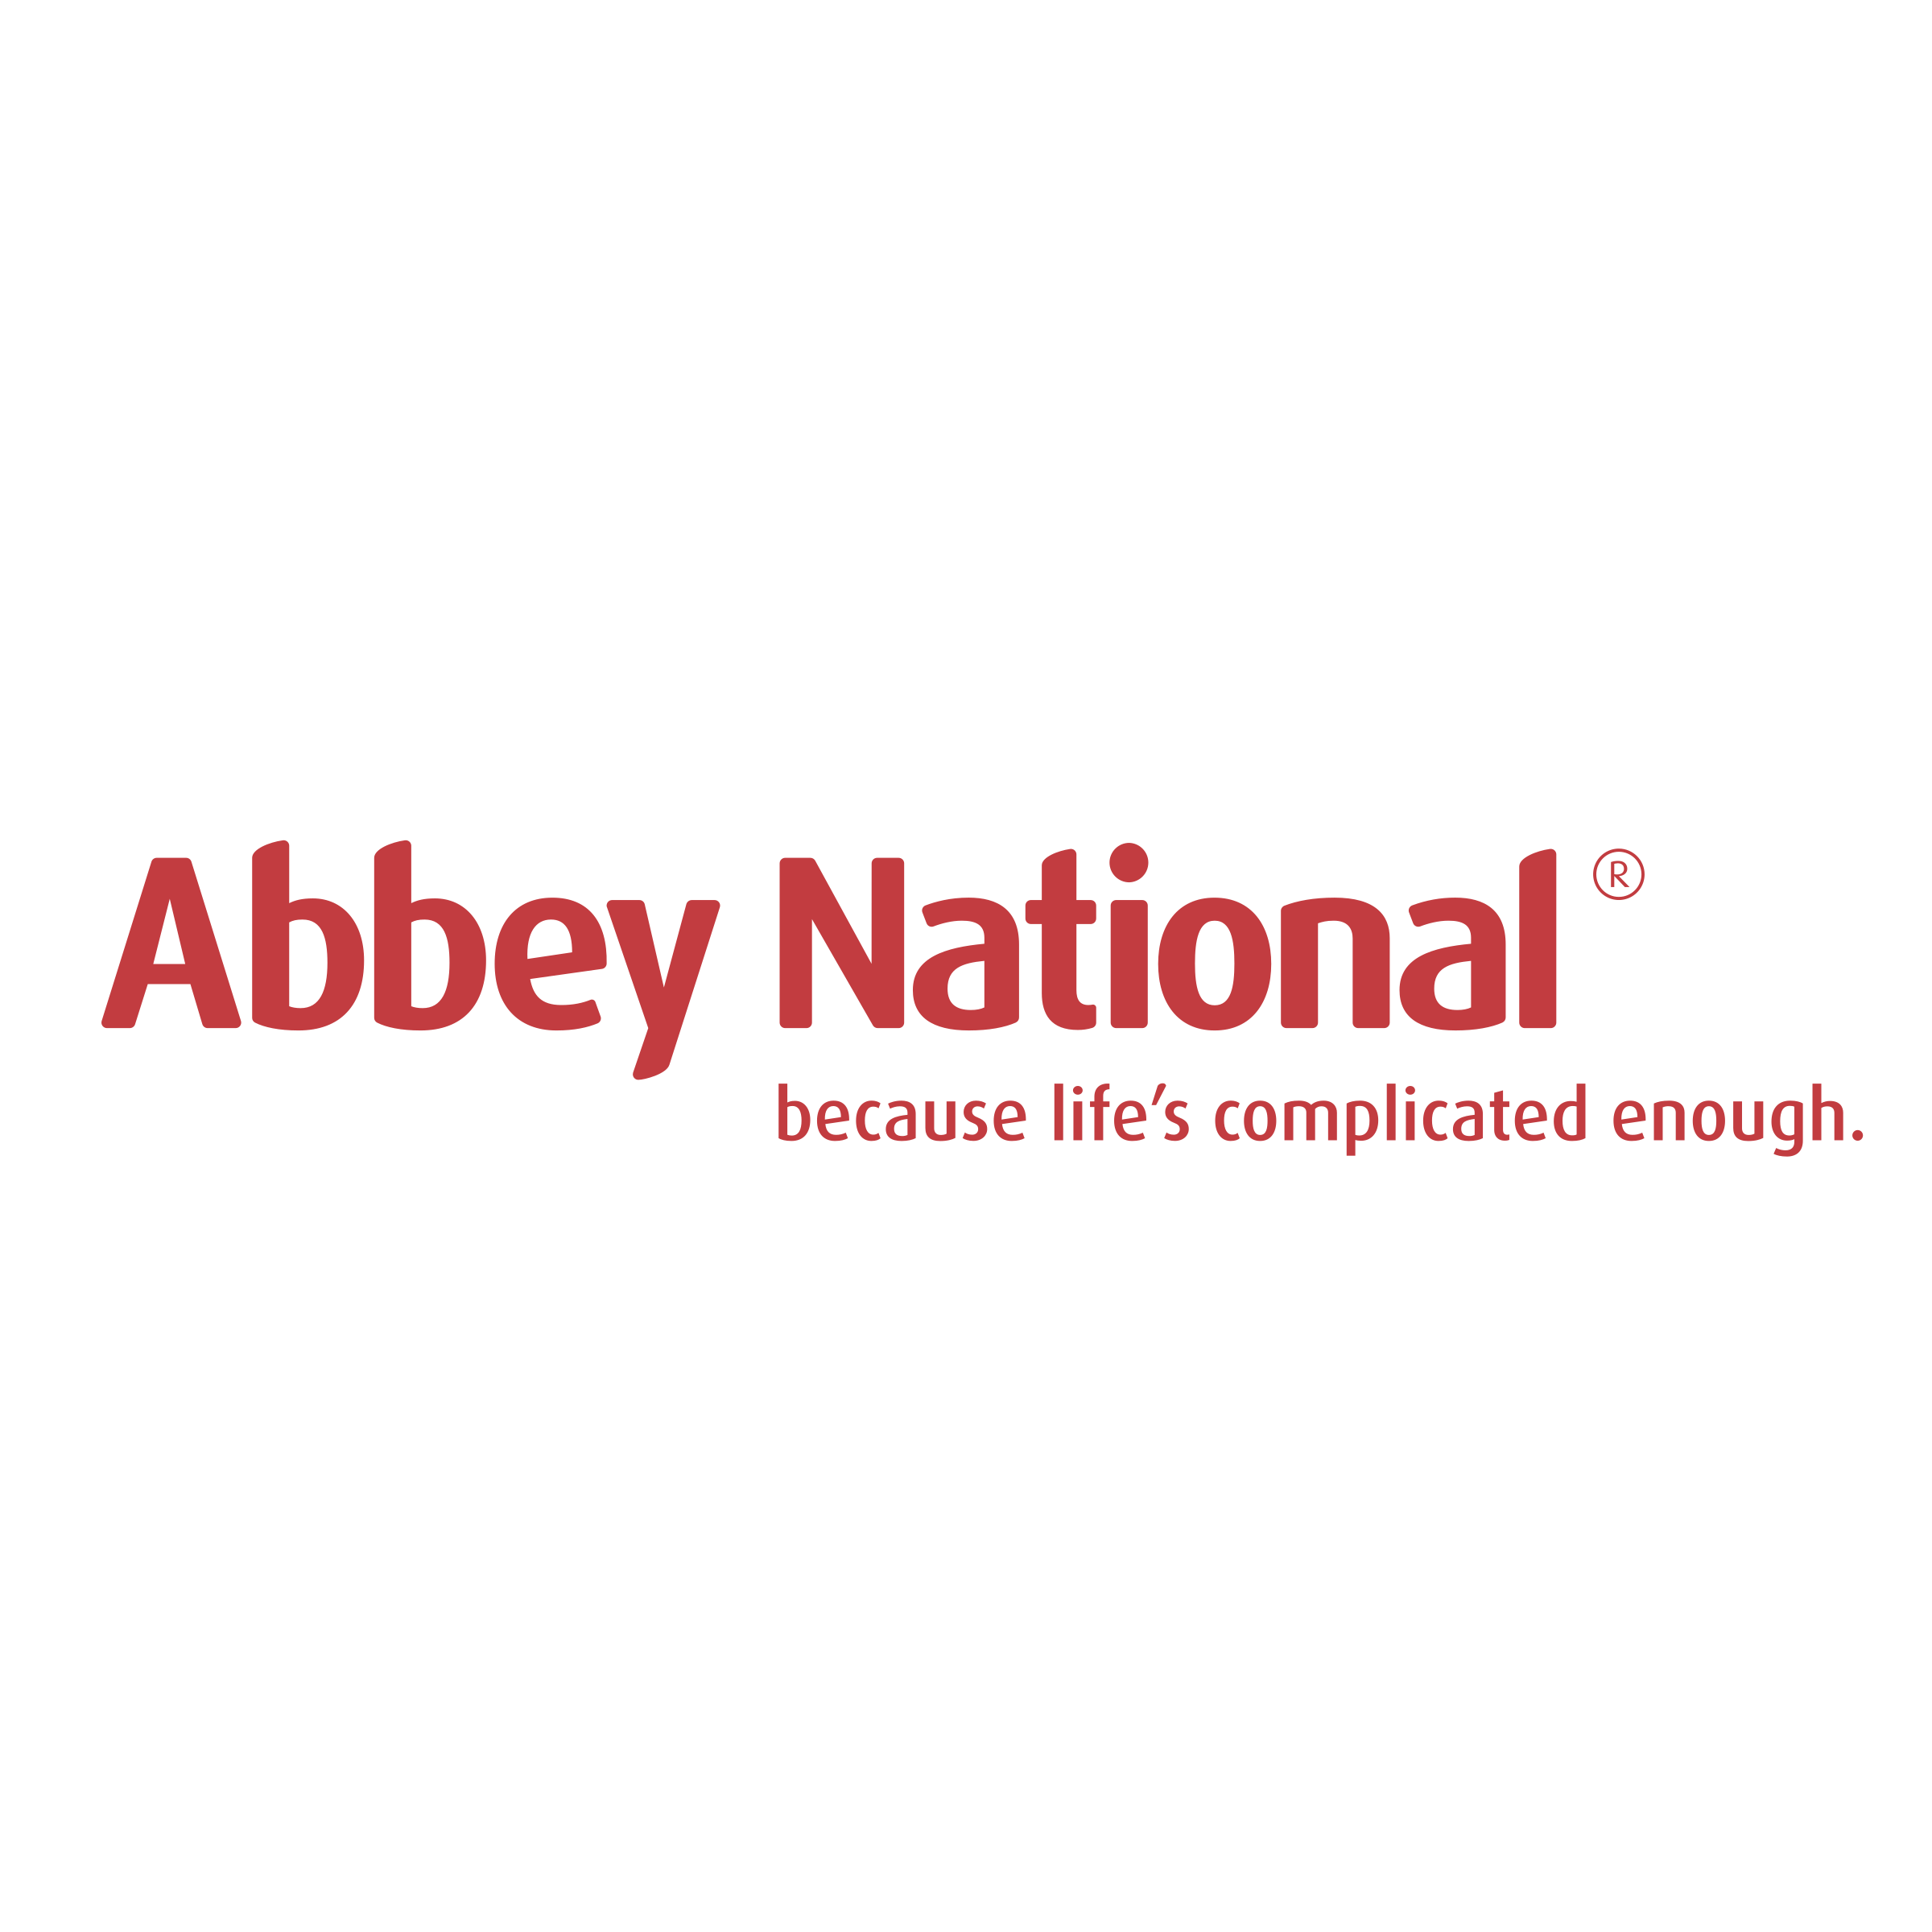 Abbey Logo - Abbey National Logo PNG Transparent & SVG Vector - Freebie Supply